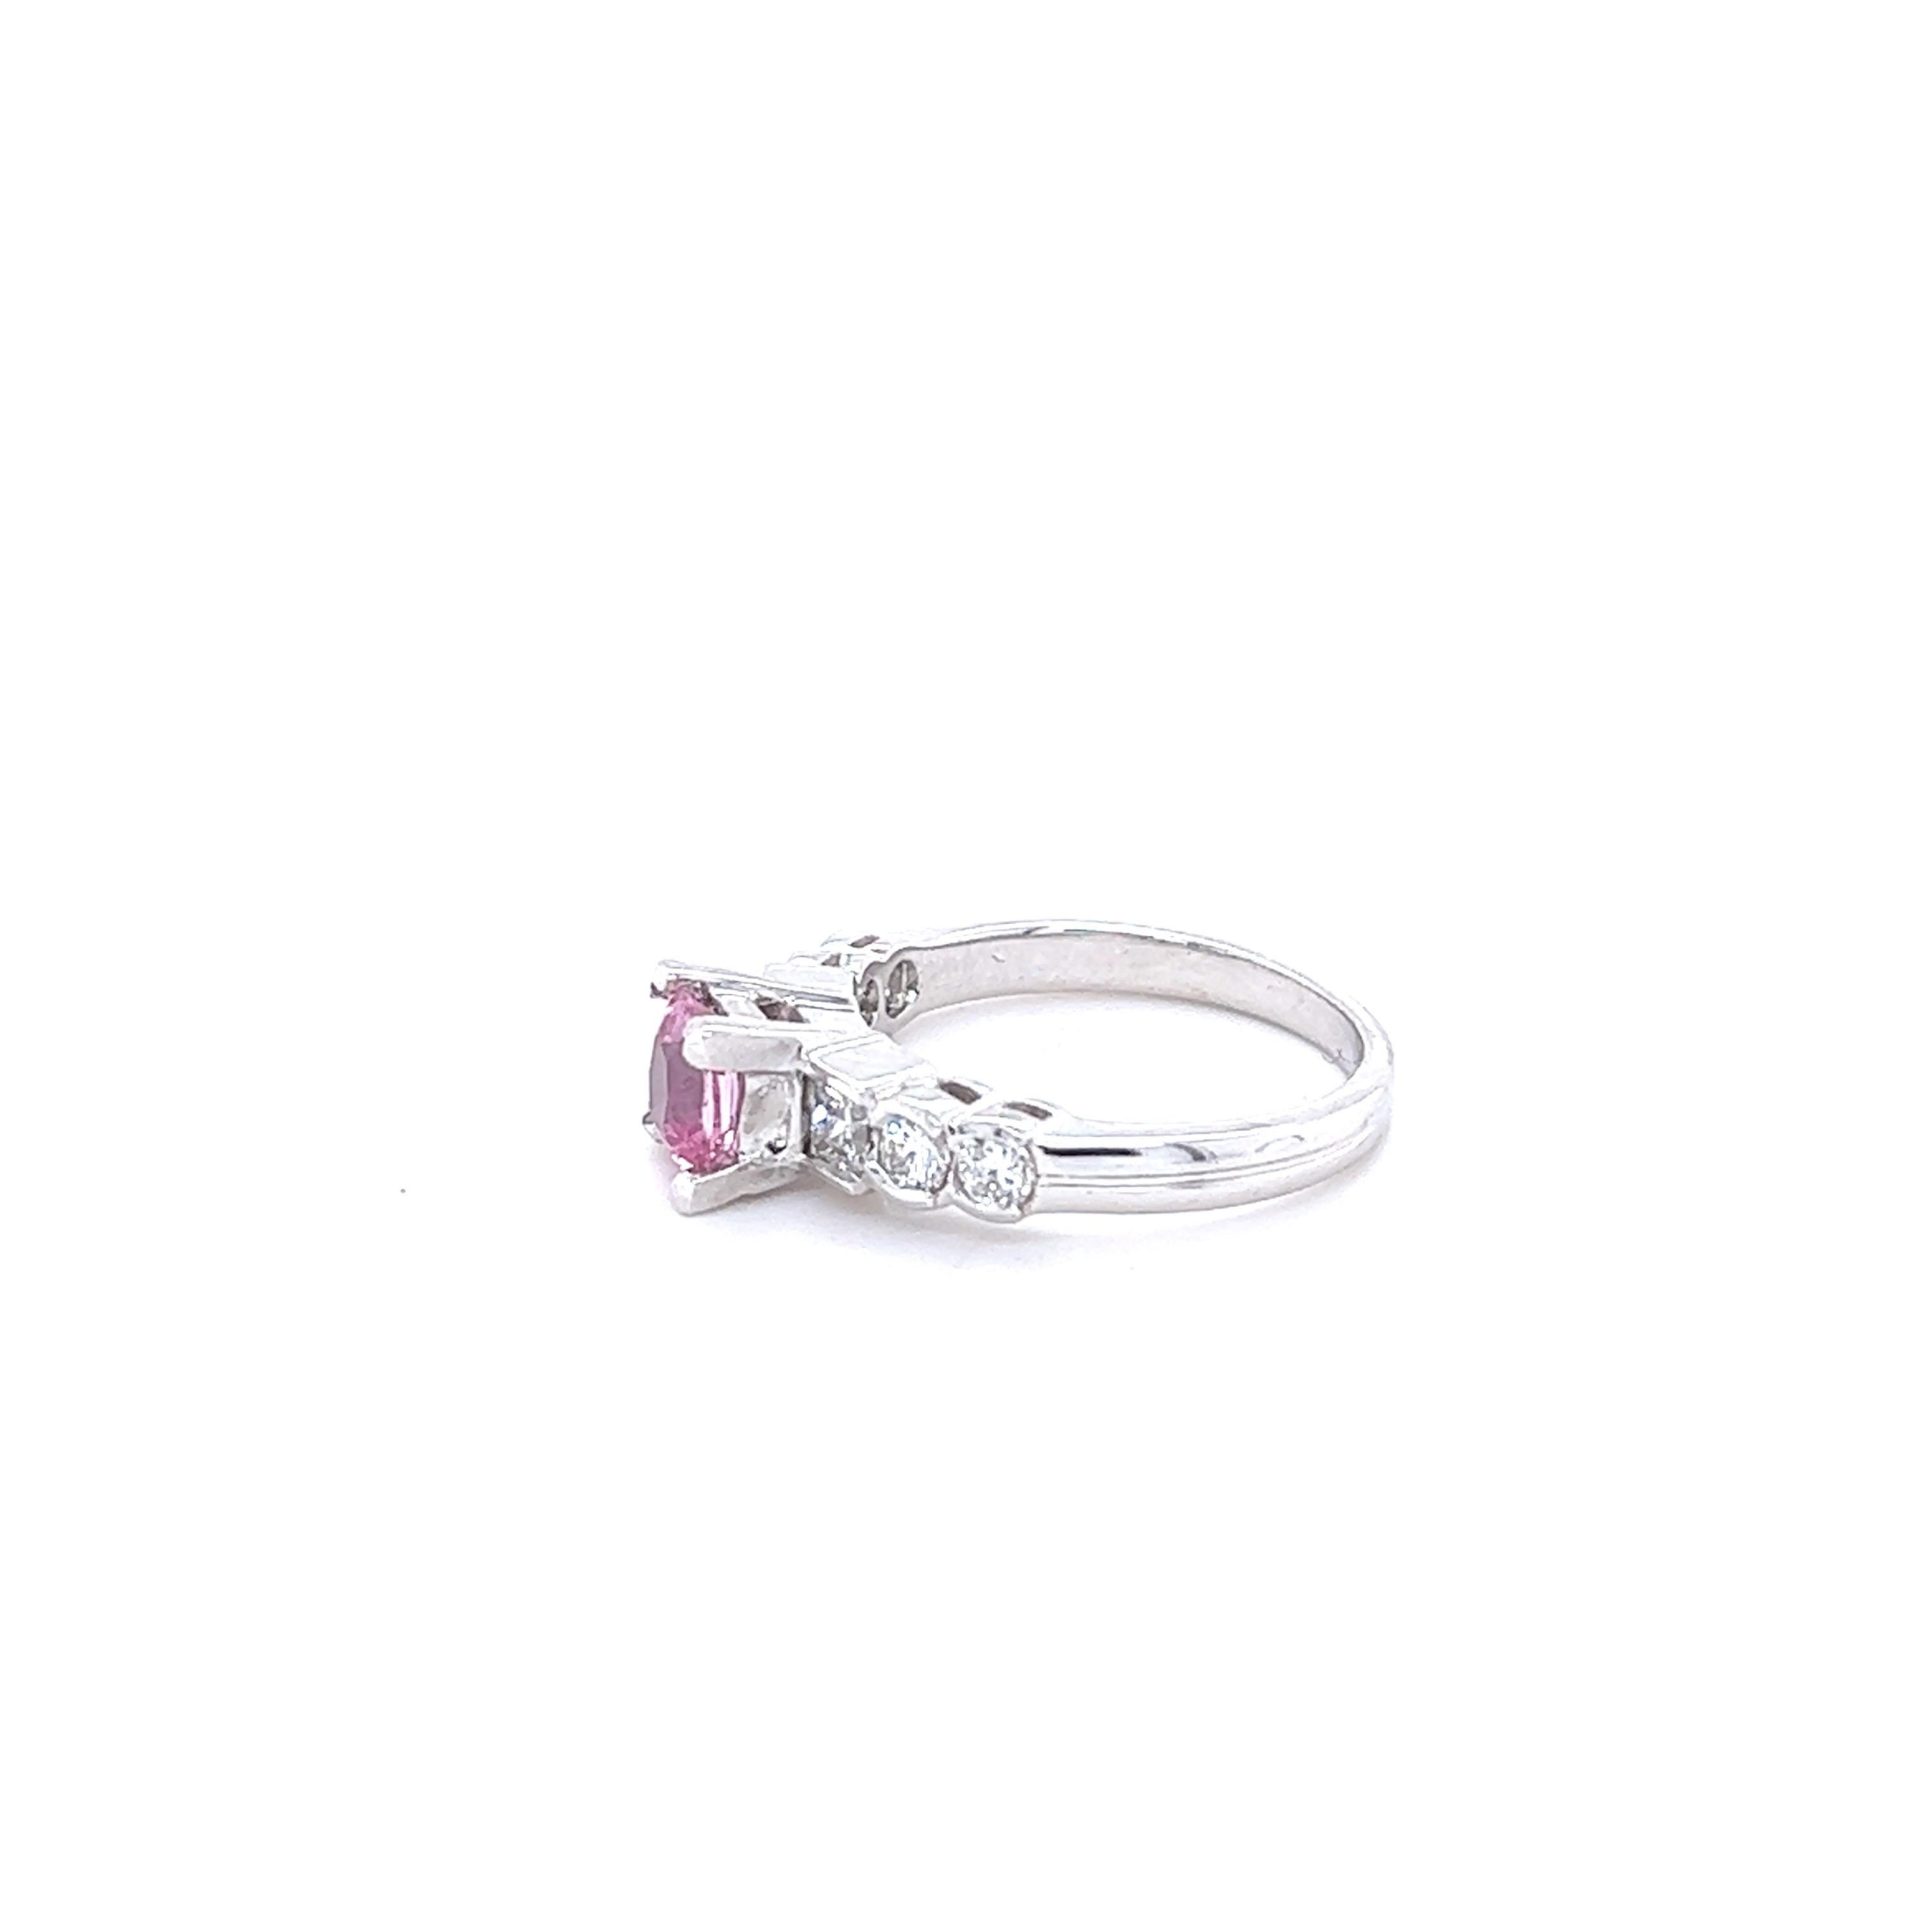 This beautiful ring has a Natural Cushion Cut Pink Sapphire that weighs 1.02 Carats and measures at approximately 5 mm x 5 mm. 

The ring is embellished with 4 Round Cut Diamonds and 2 Princess Cut Diamonds that weigh 0.70 Carats with a clarity and